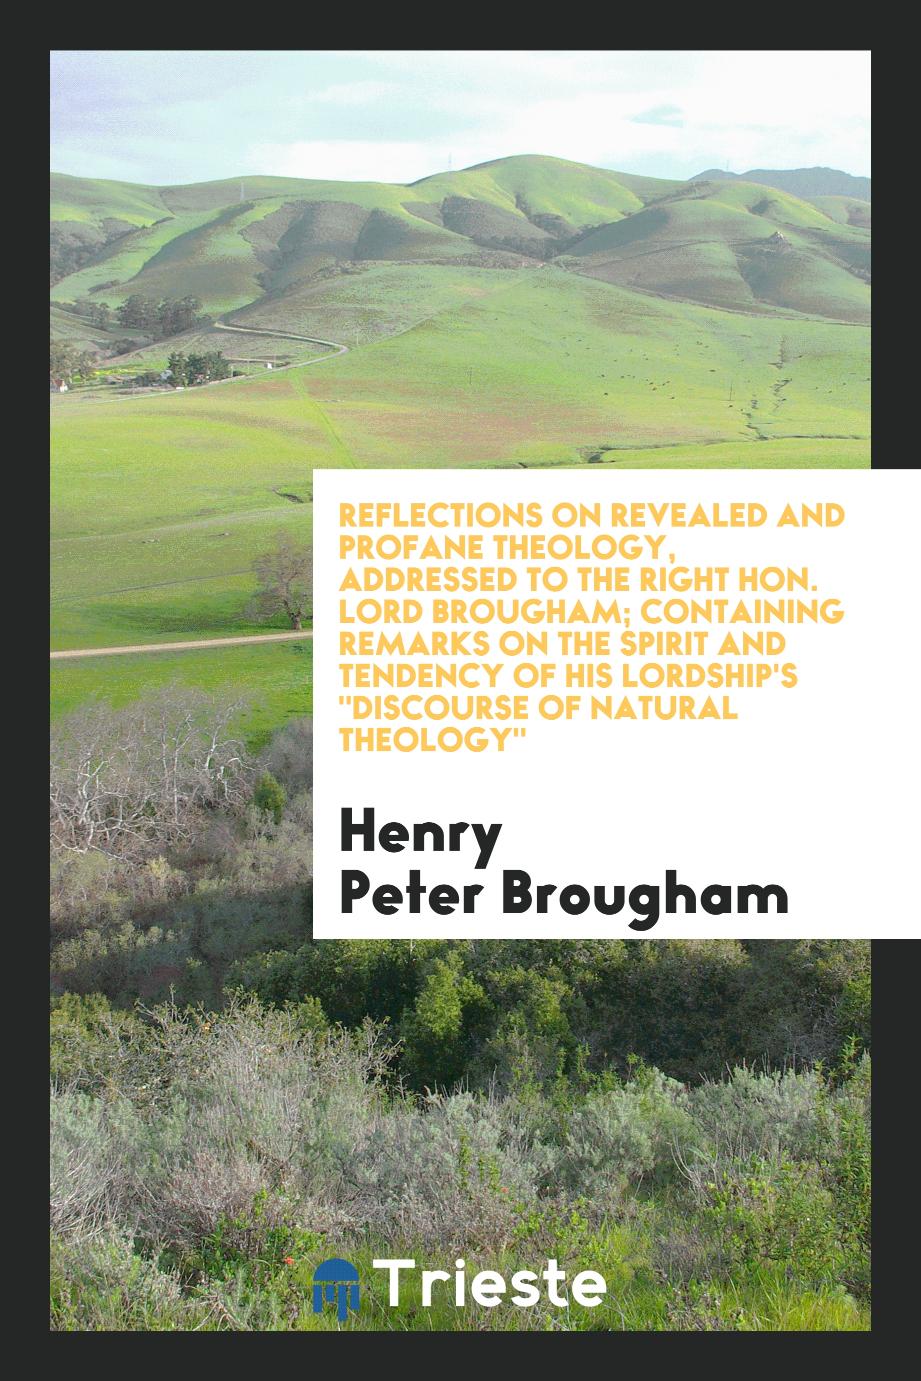 Reflections on Revealed and Profane Theology, Addressed to the Right Hon. Lord Brougham; Containing Remarks on the Spirit and Tendency of His Lordship's "Discourse of Natural Theology"